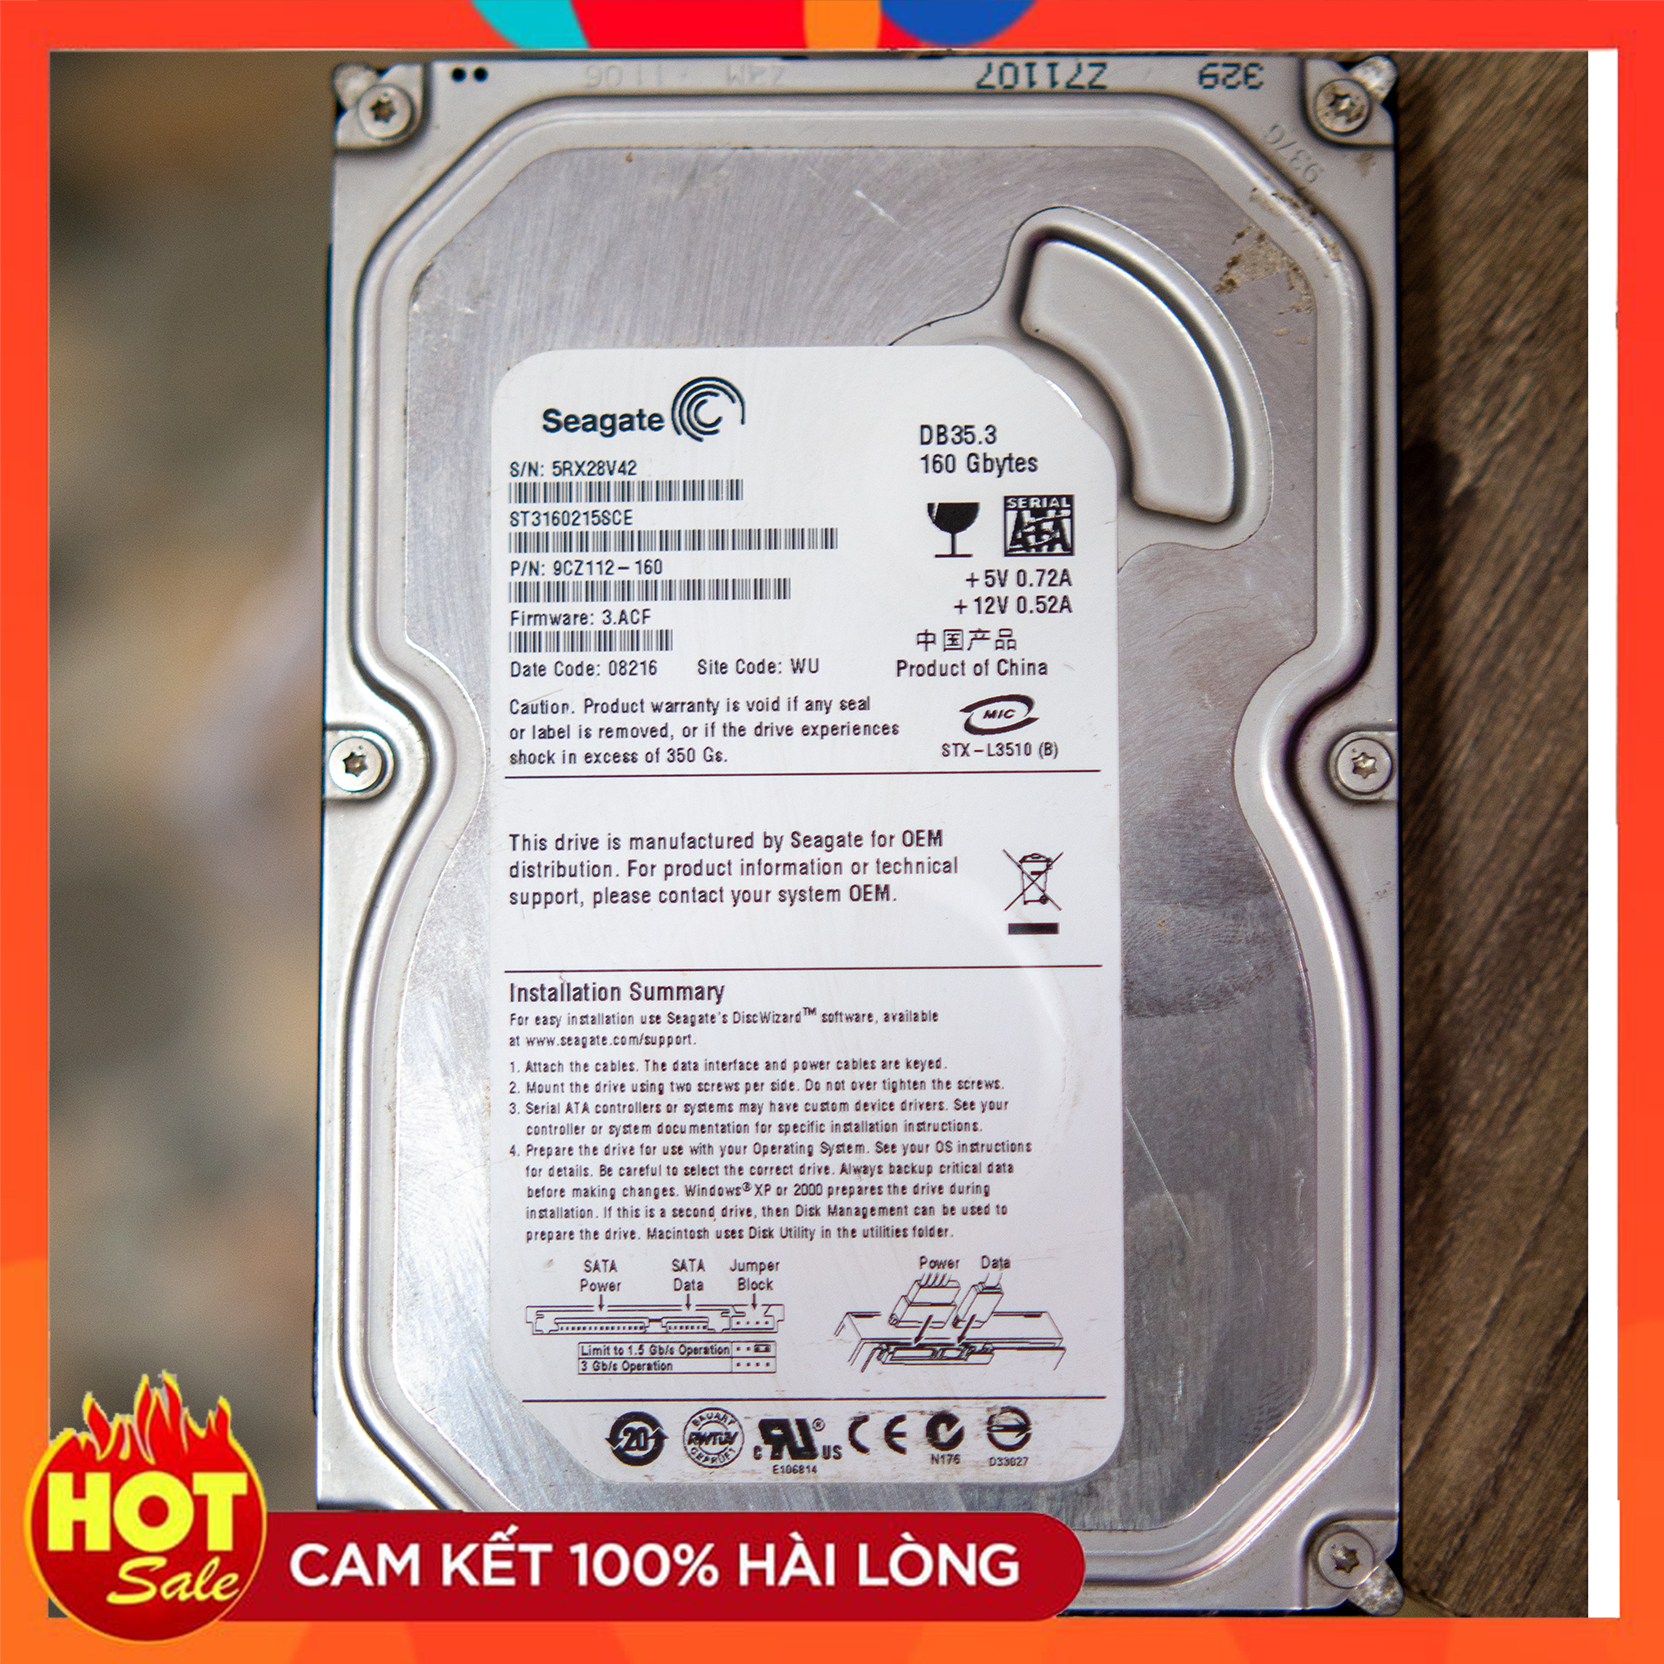 [HDD] Ổ cứng gắn trong HDD Seagate 160GB